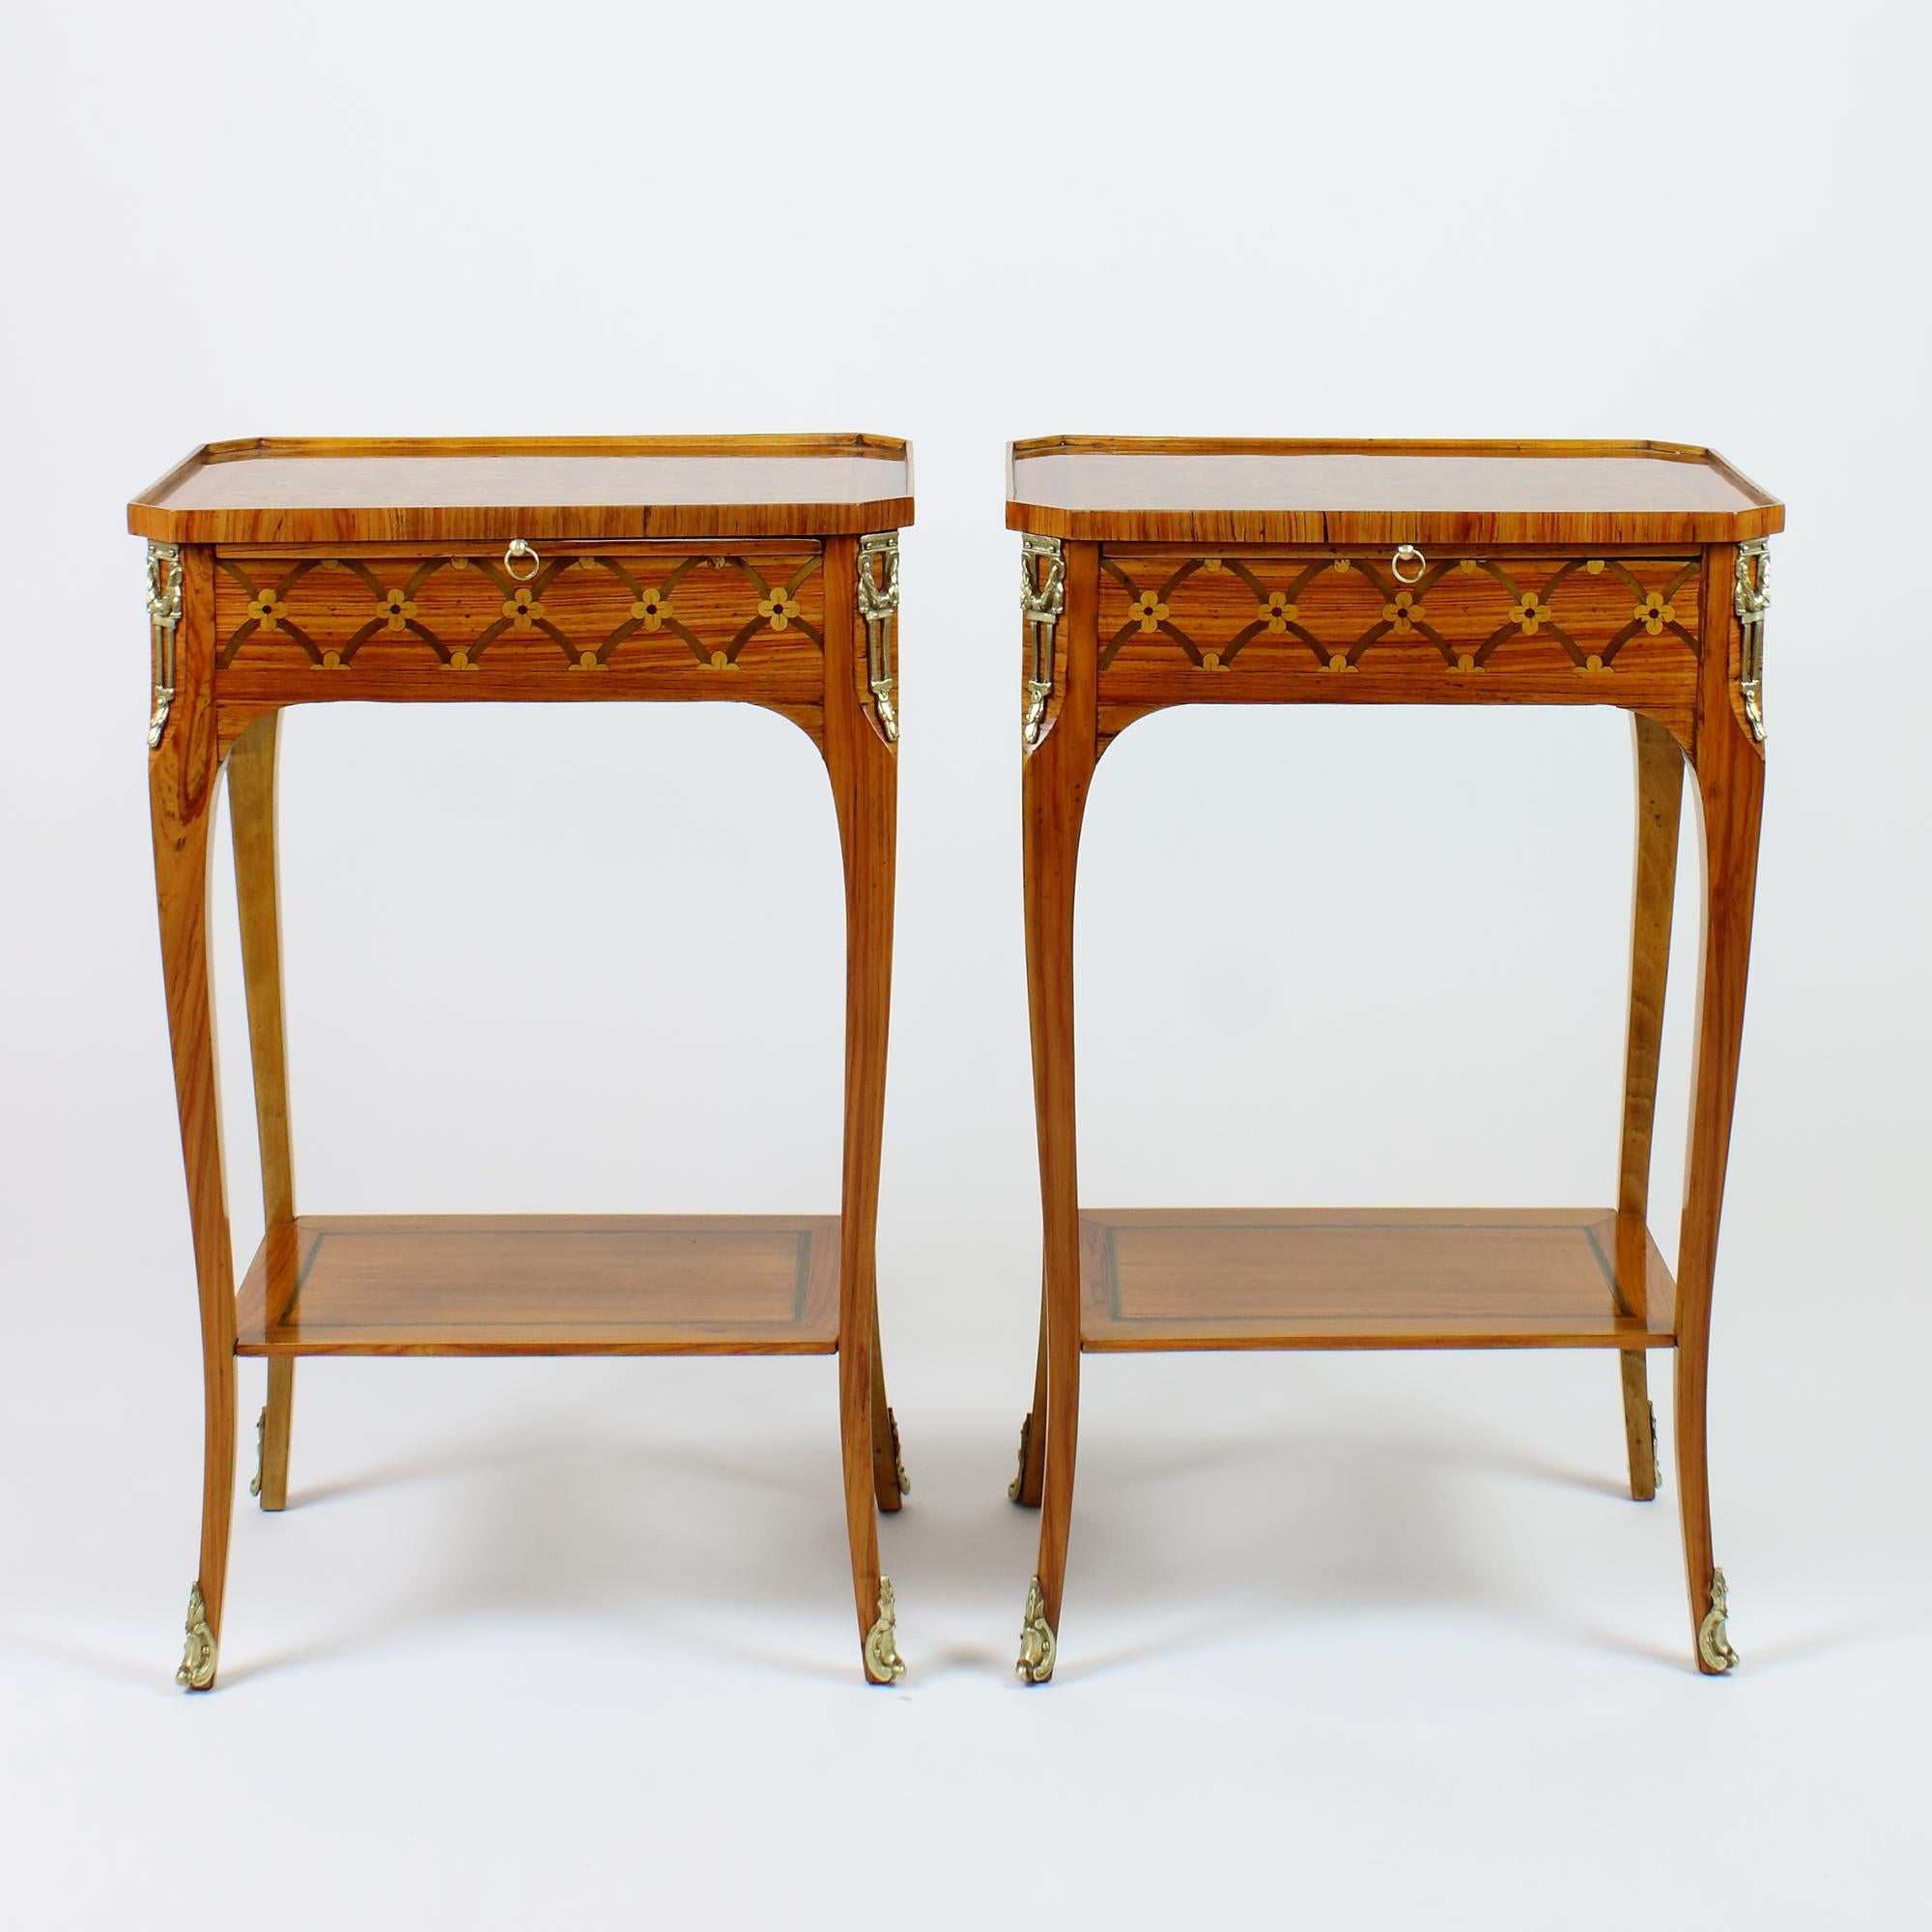 Gilt Pair of 19th/20th Century Louis XVI Marquetry Side Tables /Lady's Writing Tables